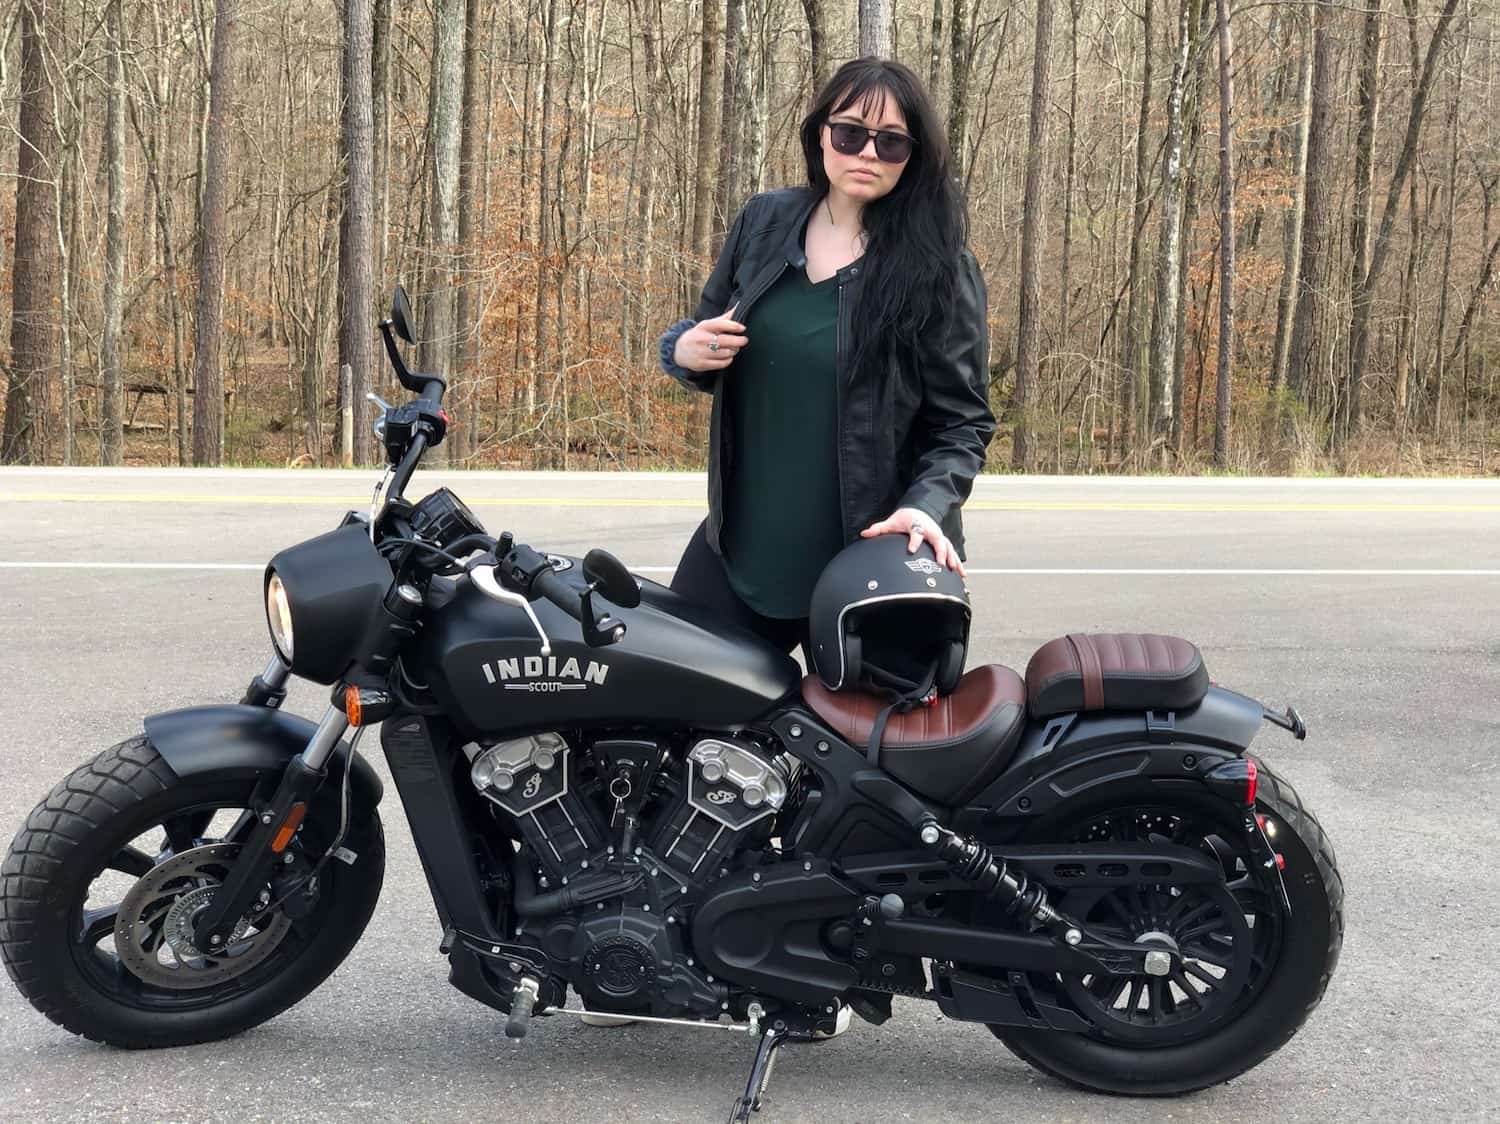 Samantha with a Motorcycle